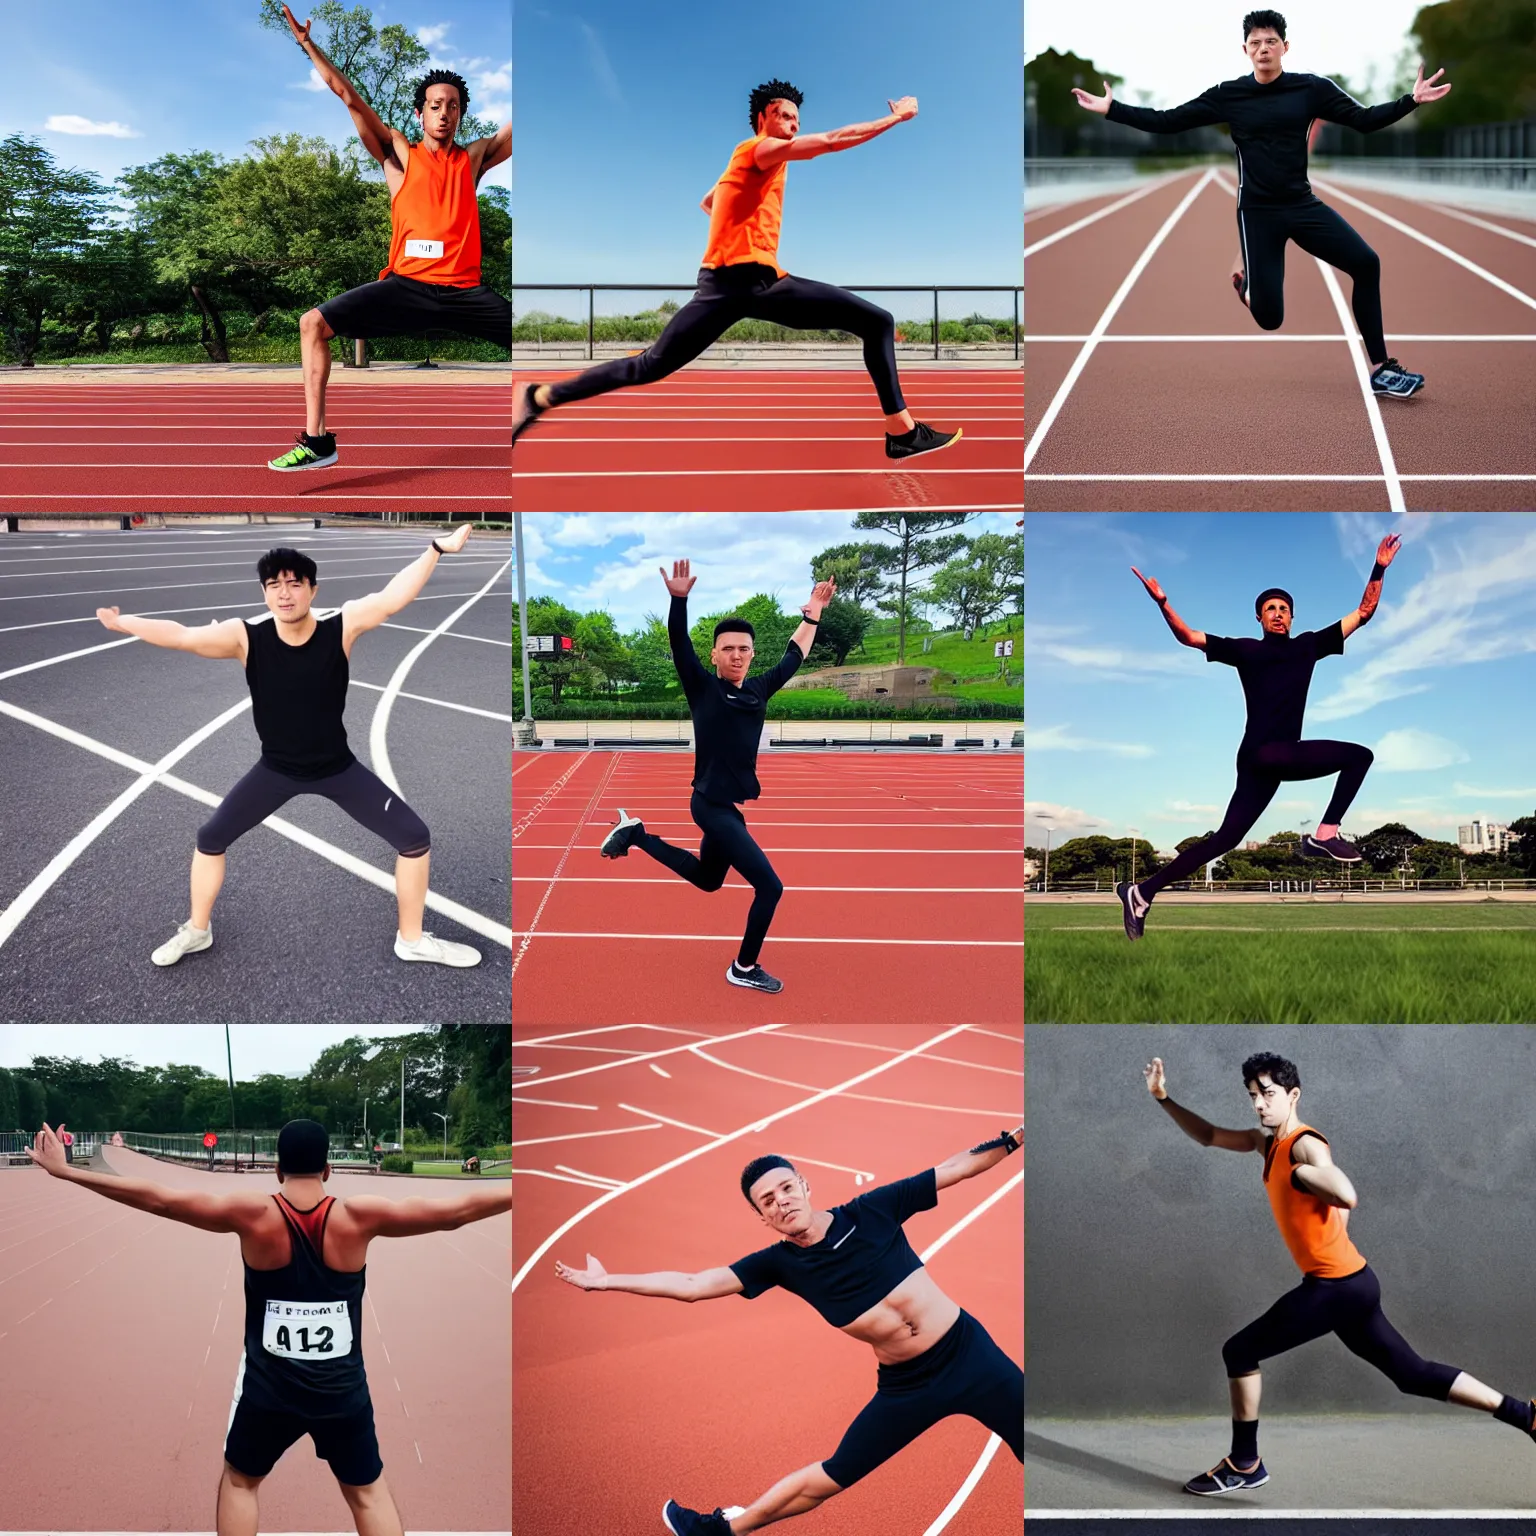 Prompt: photo of a man doing the Naruto Run pose by leaning forward with his arms outstretched behind his back at a running track